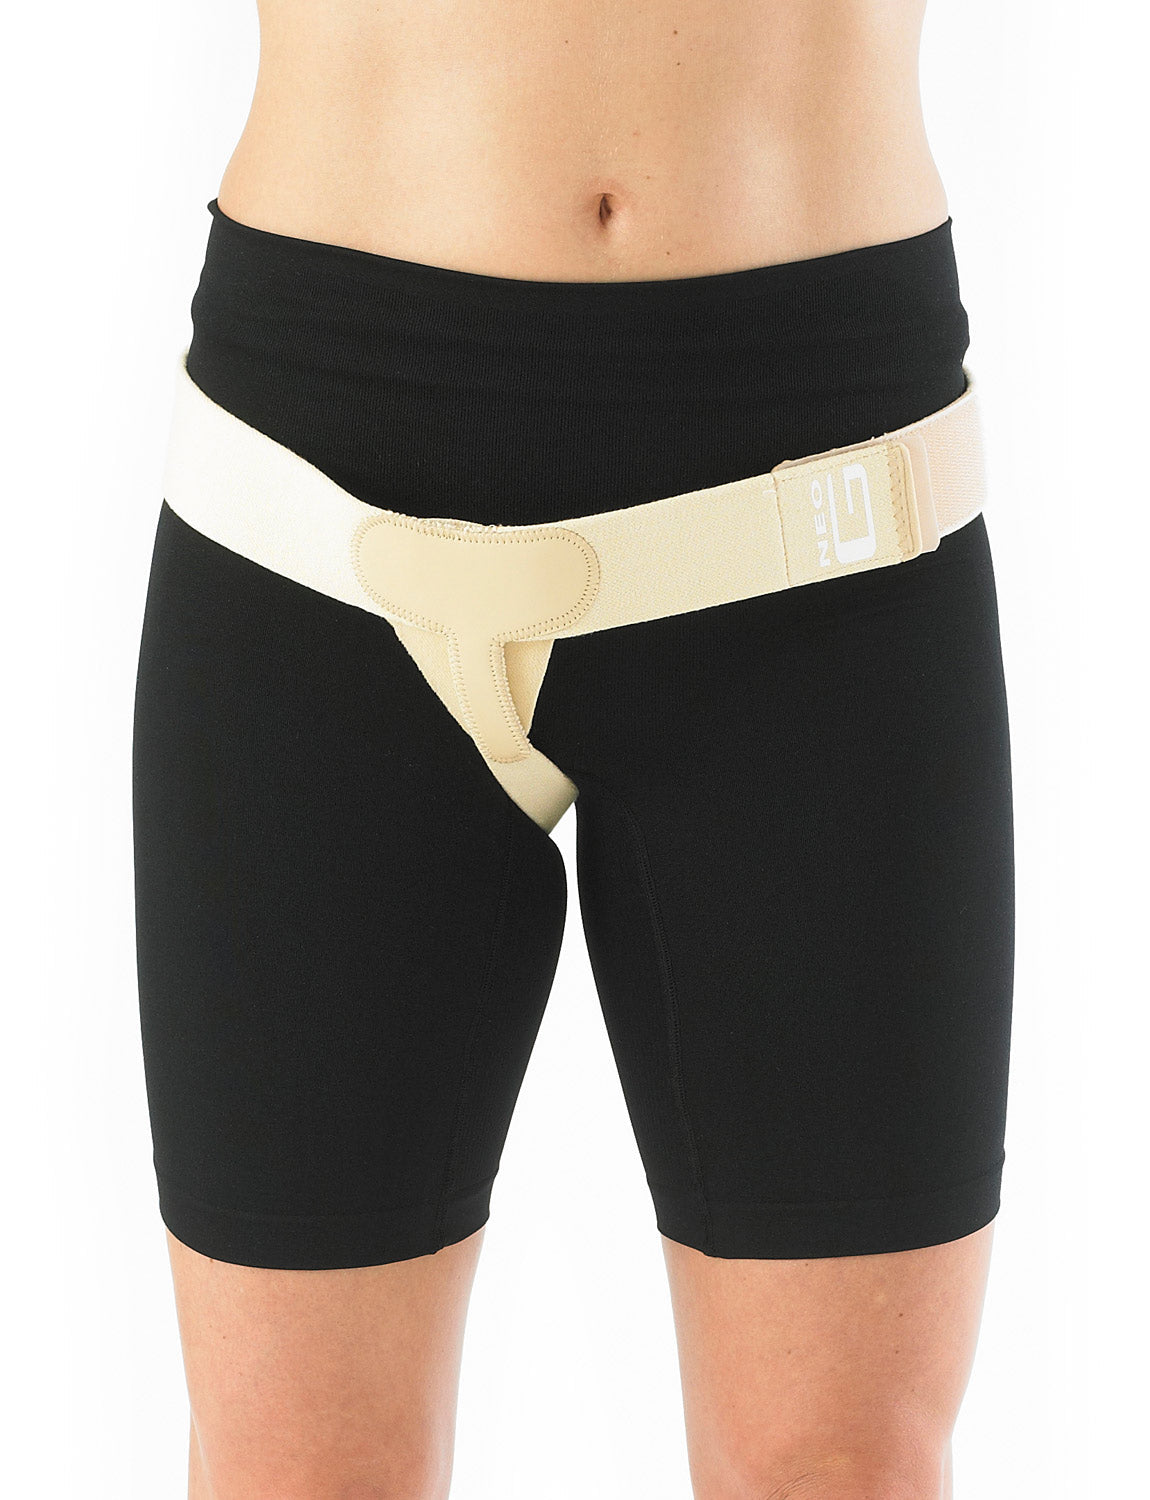 Lower Hernia Support